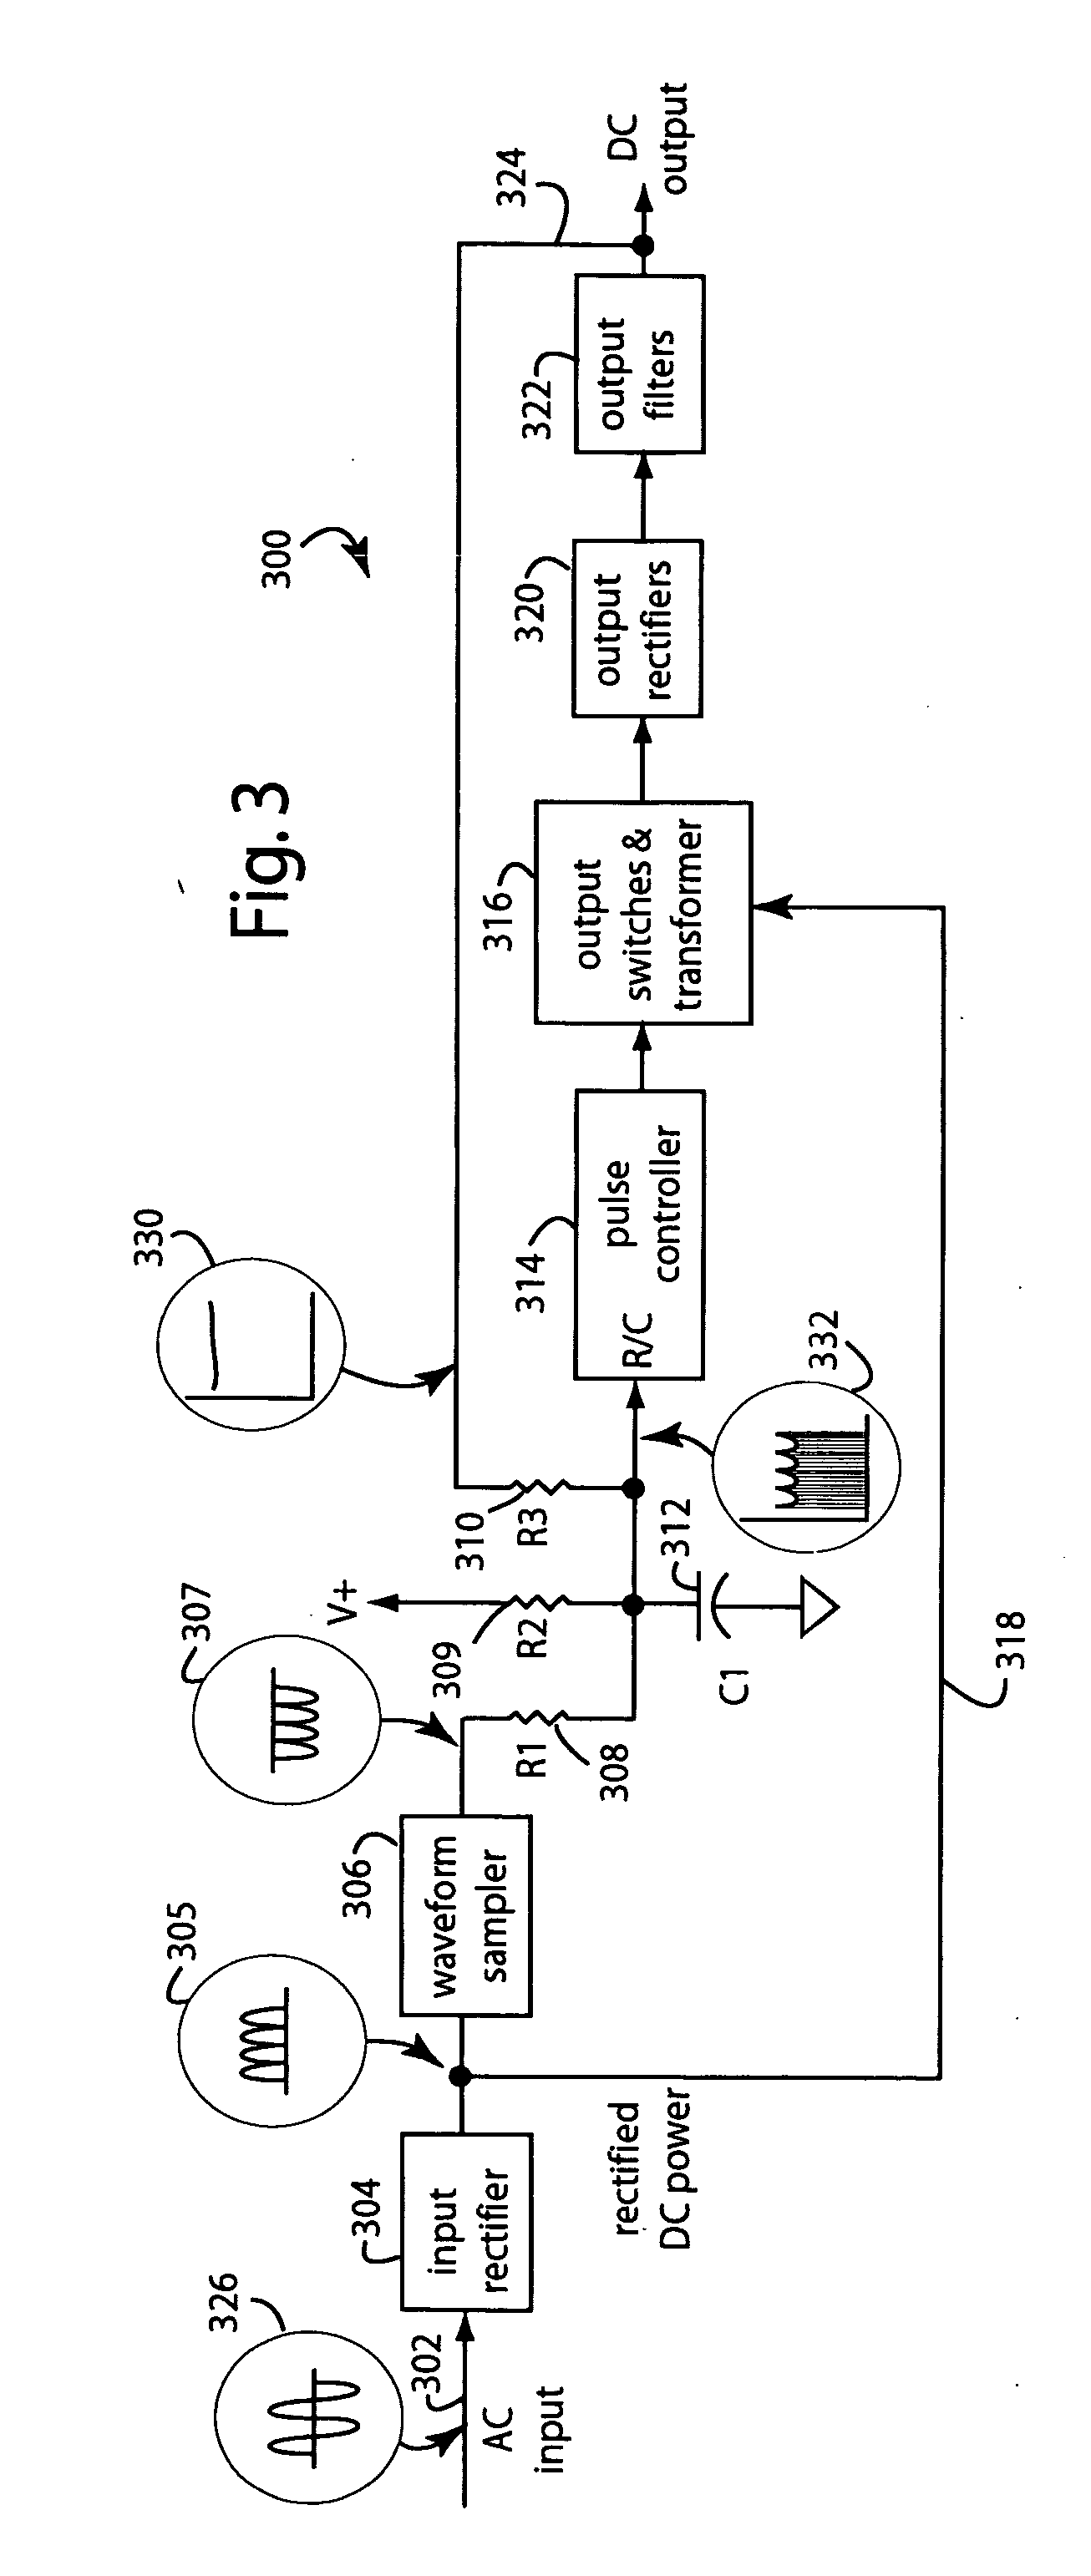 Single-stage power converter with high power factor